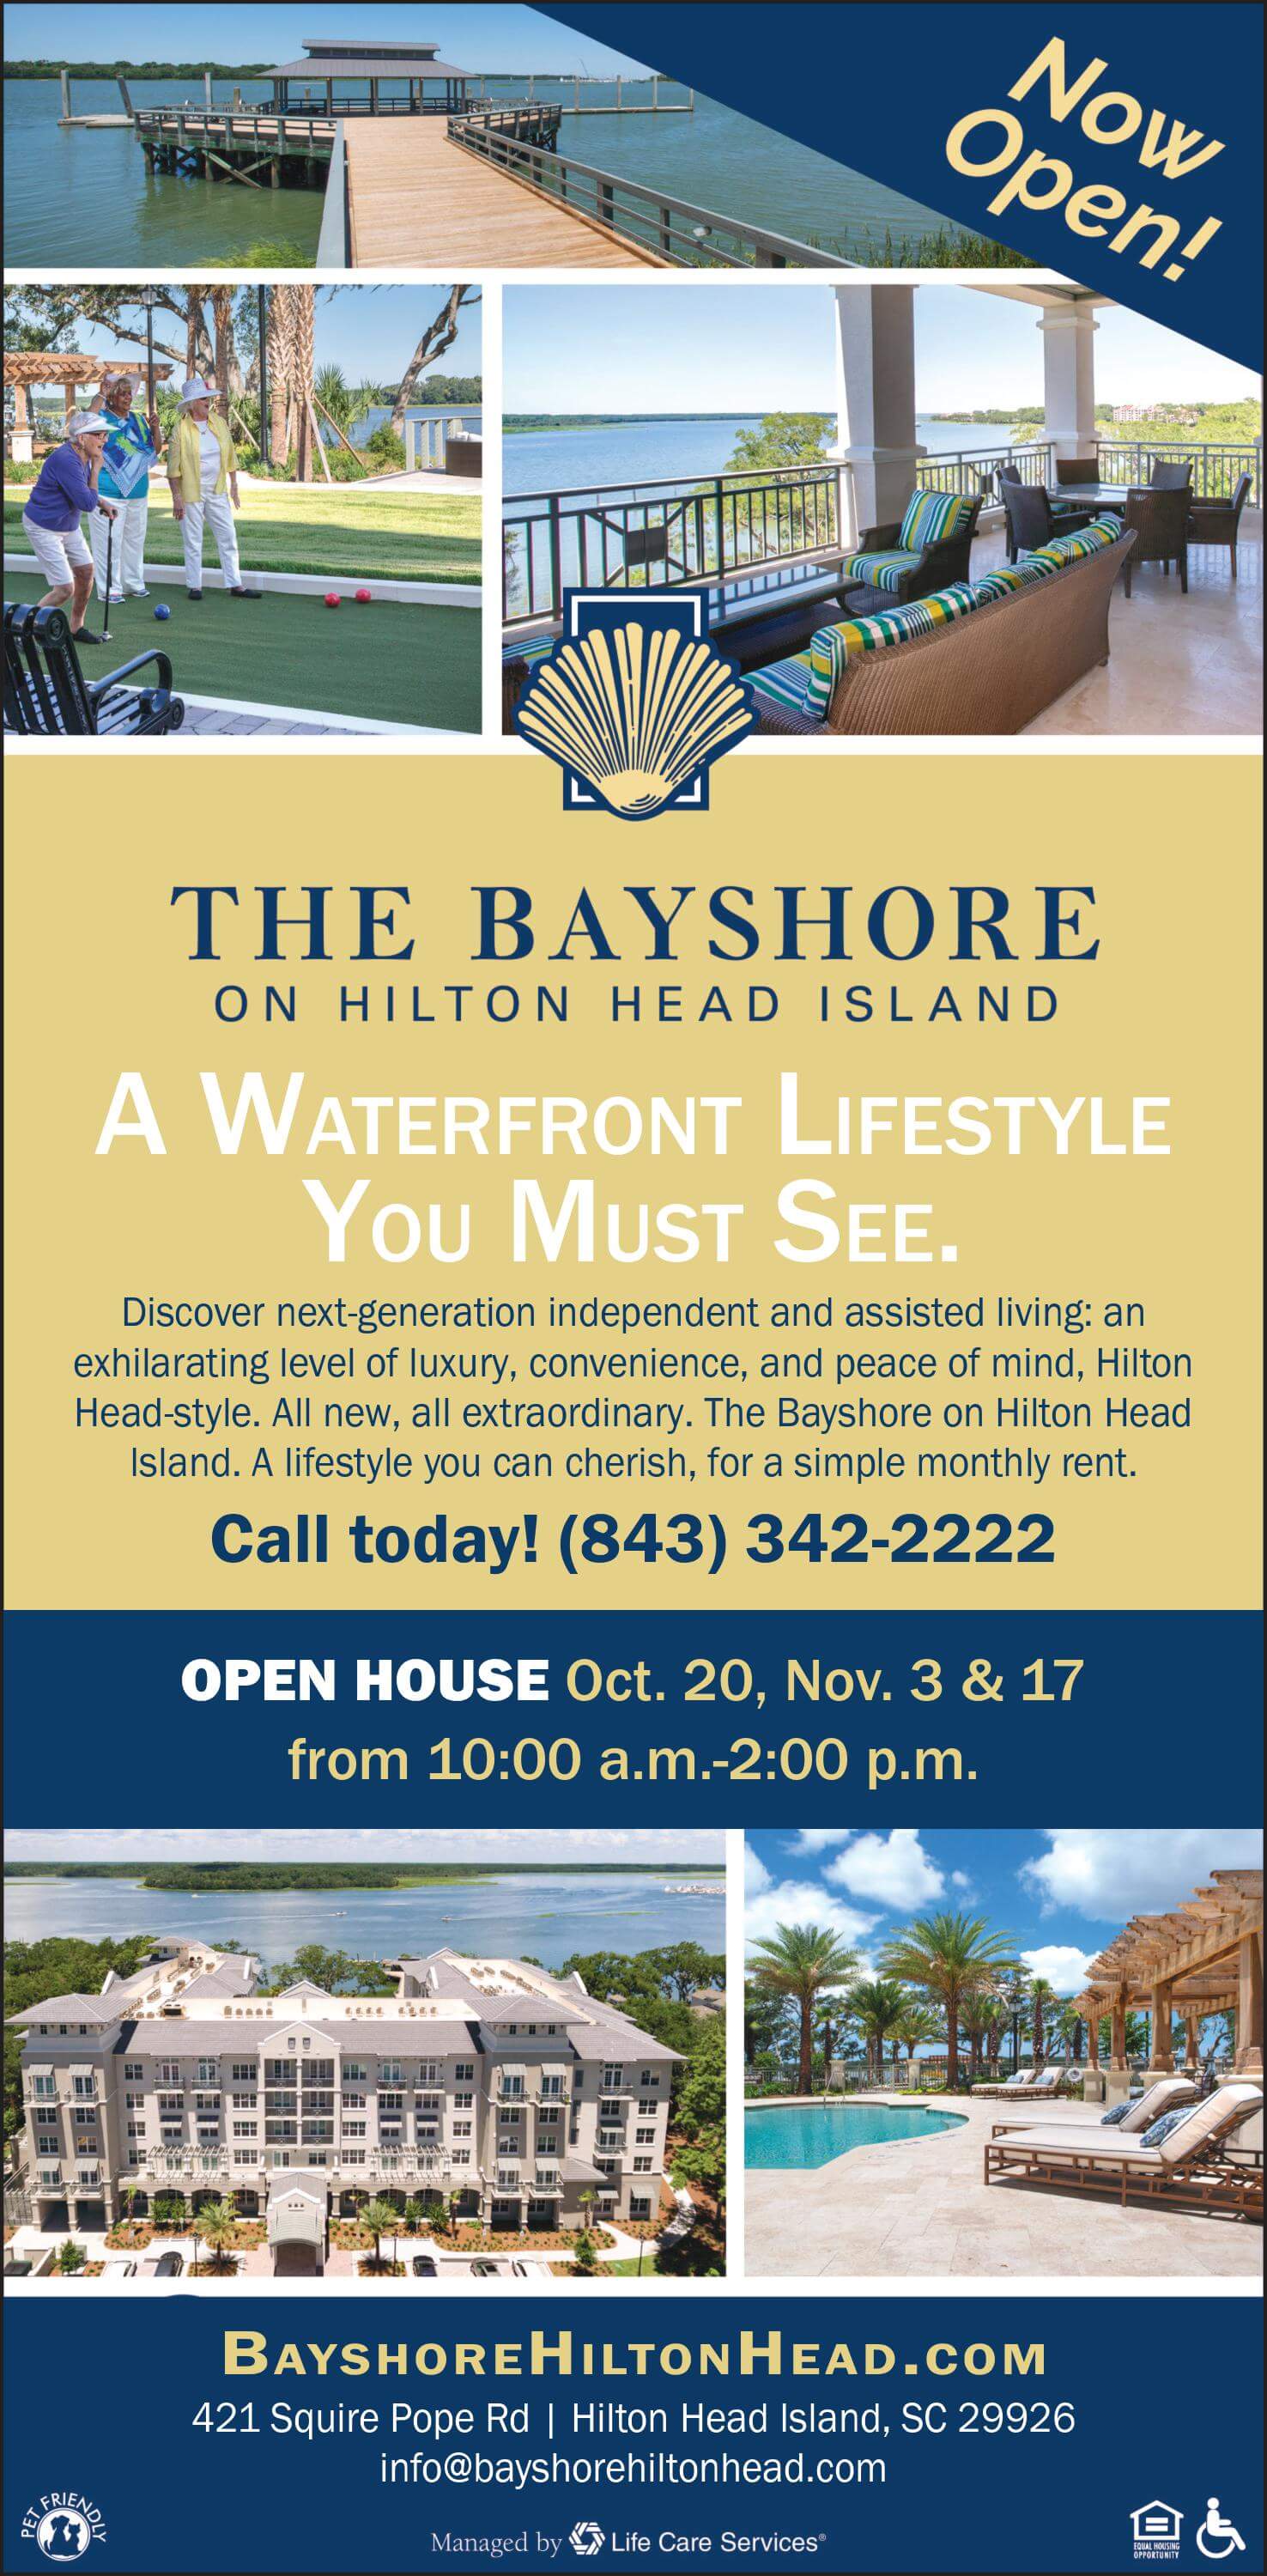 Bayshore Independent and Assisted Living on Hilton Head Island